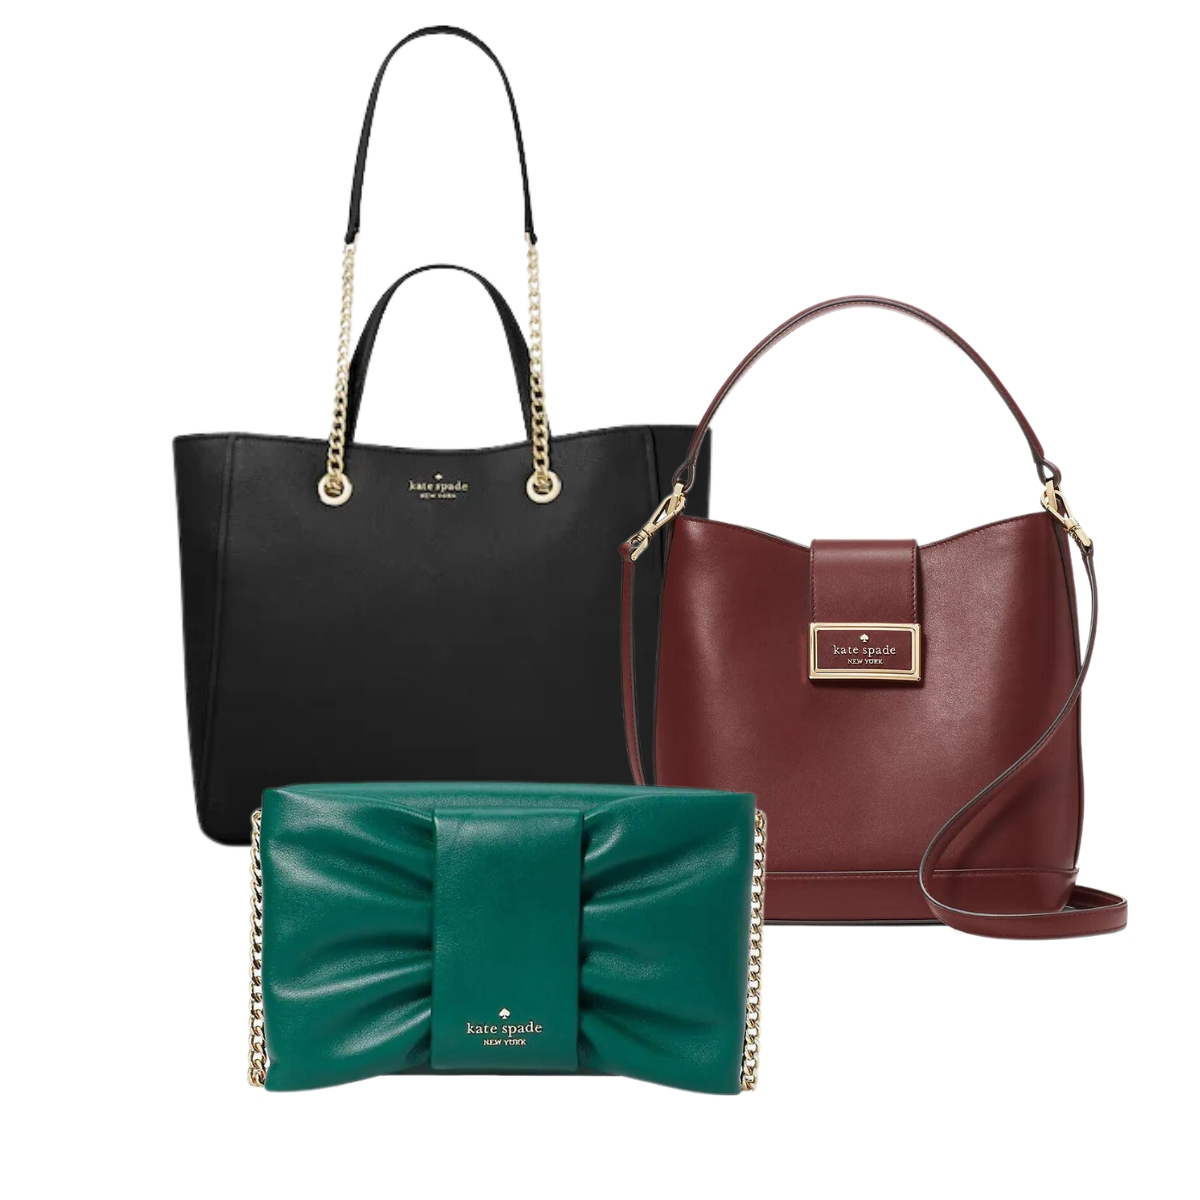 Guess Handbags On Sale Up To 90% Off Retail